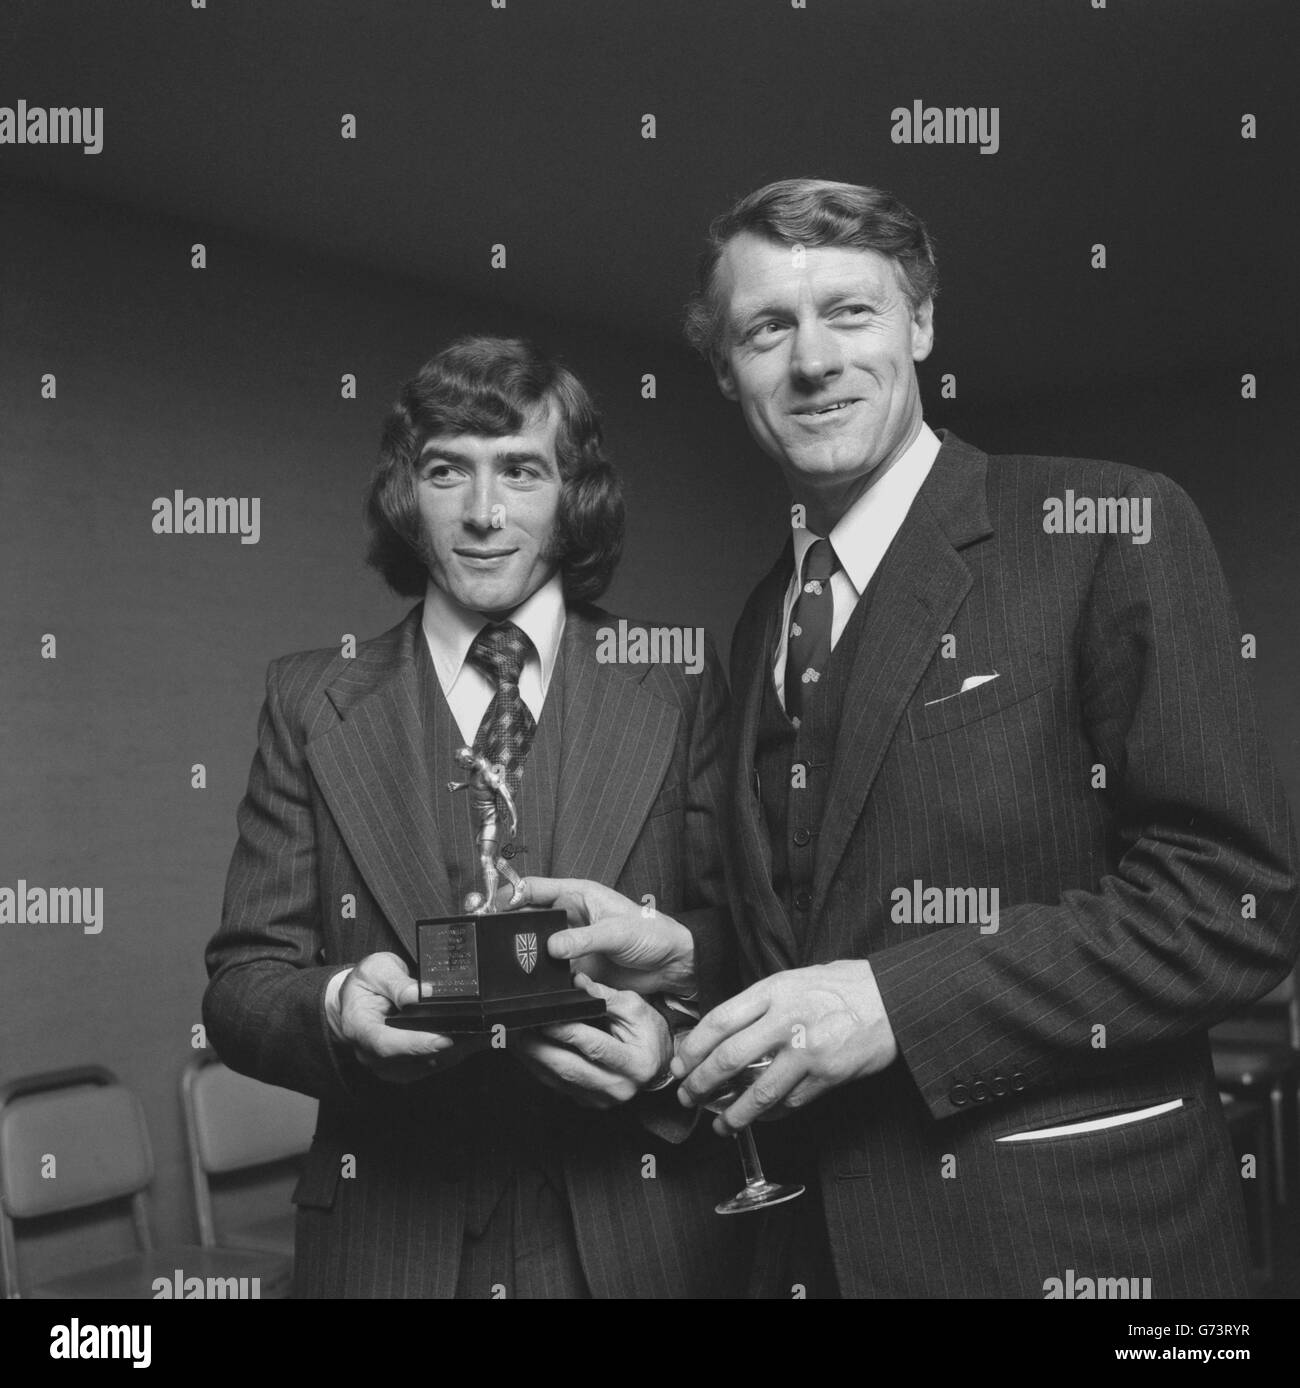 Pat Jennings (l), Tottenham Hotspur and Northern Ireland goalkeeper, with the 1973 Footballer of the Year trophy awarded to him in an annual poll conducted by the Football Writers' Association and presented to him in London. Alongside him is Eldon Griffiths, Minister for Sport. Stock Photo